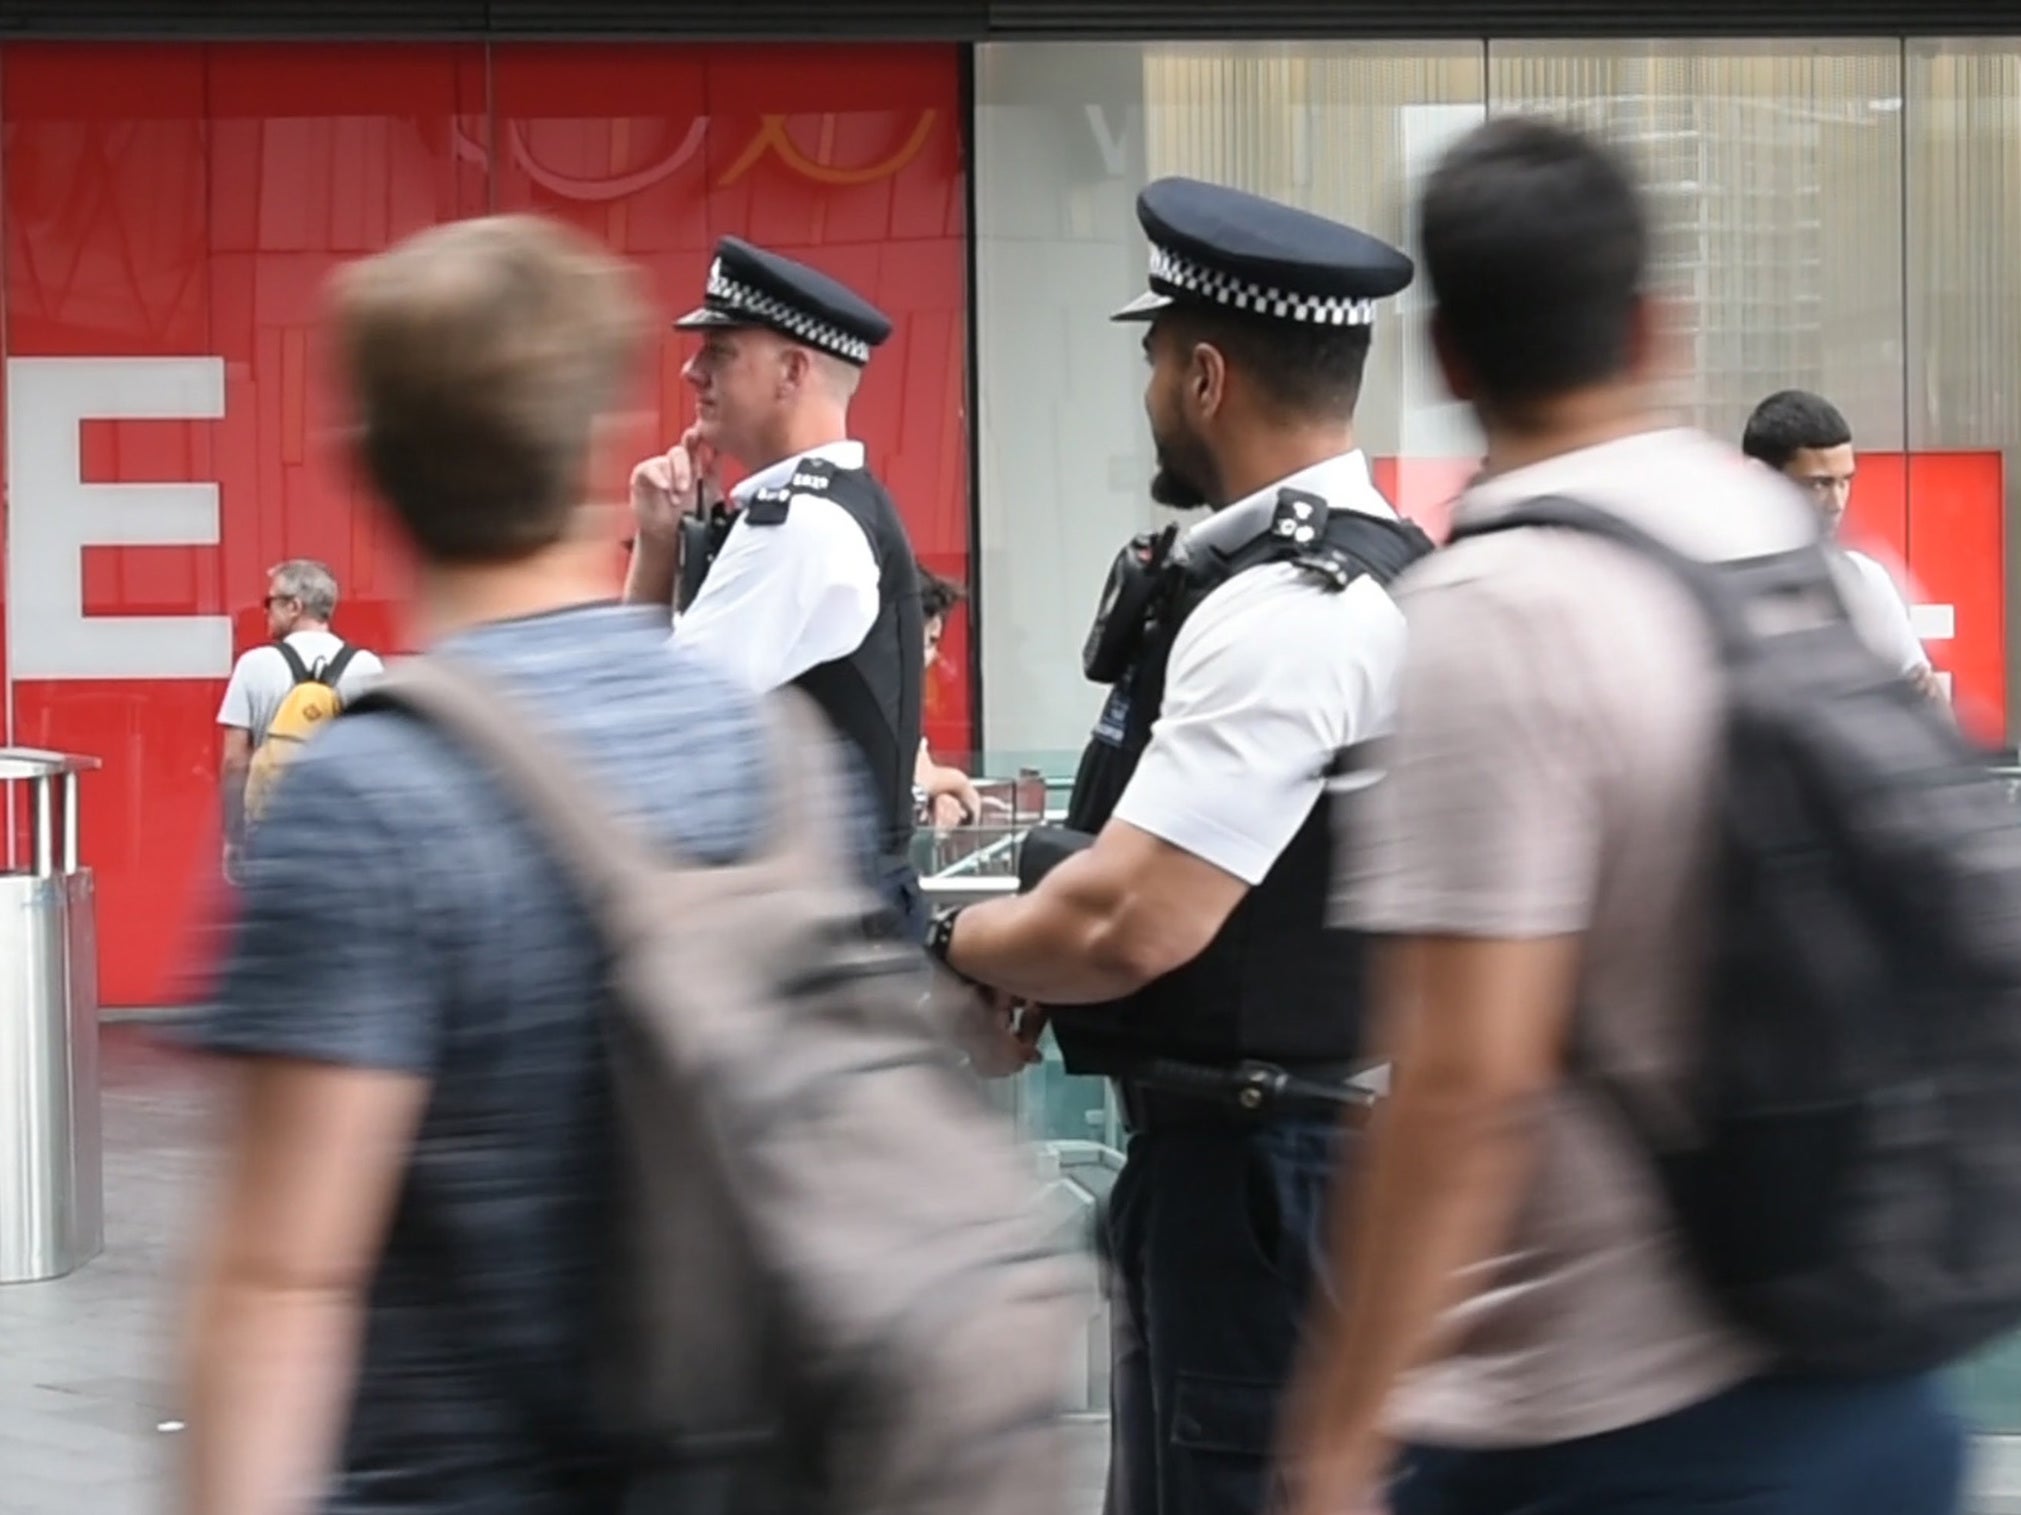 Police officers stand among shoppers in Stratford, East London.